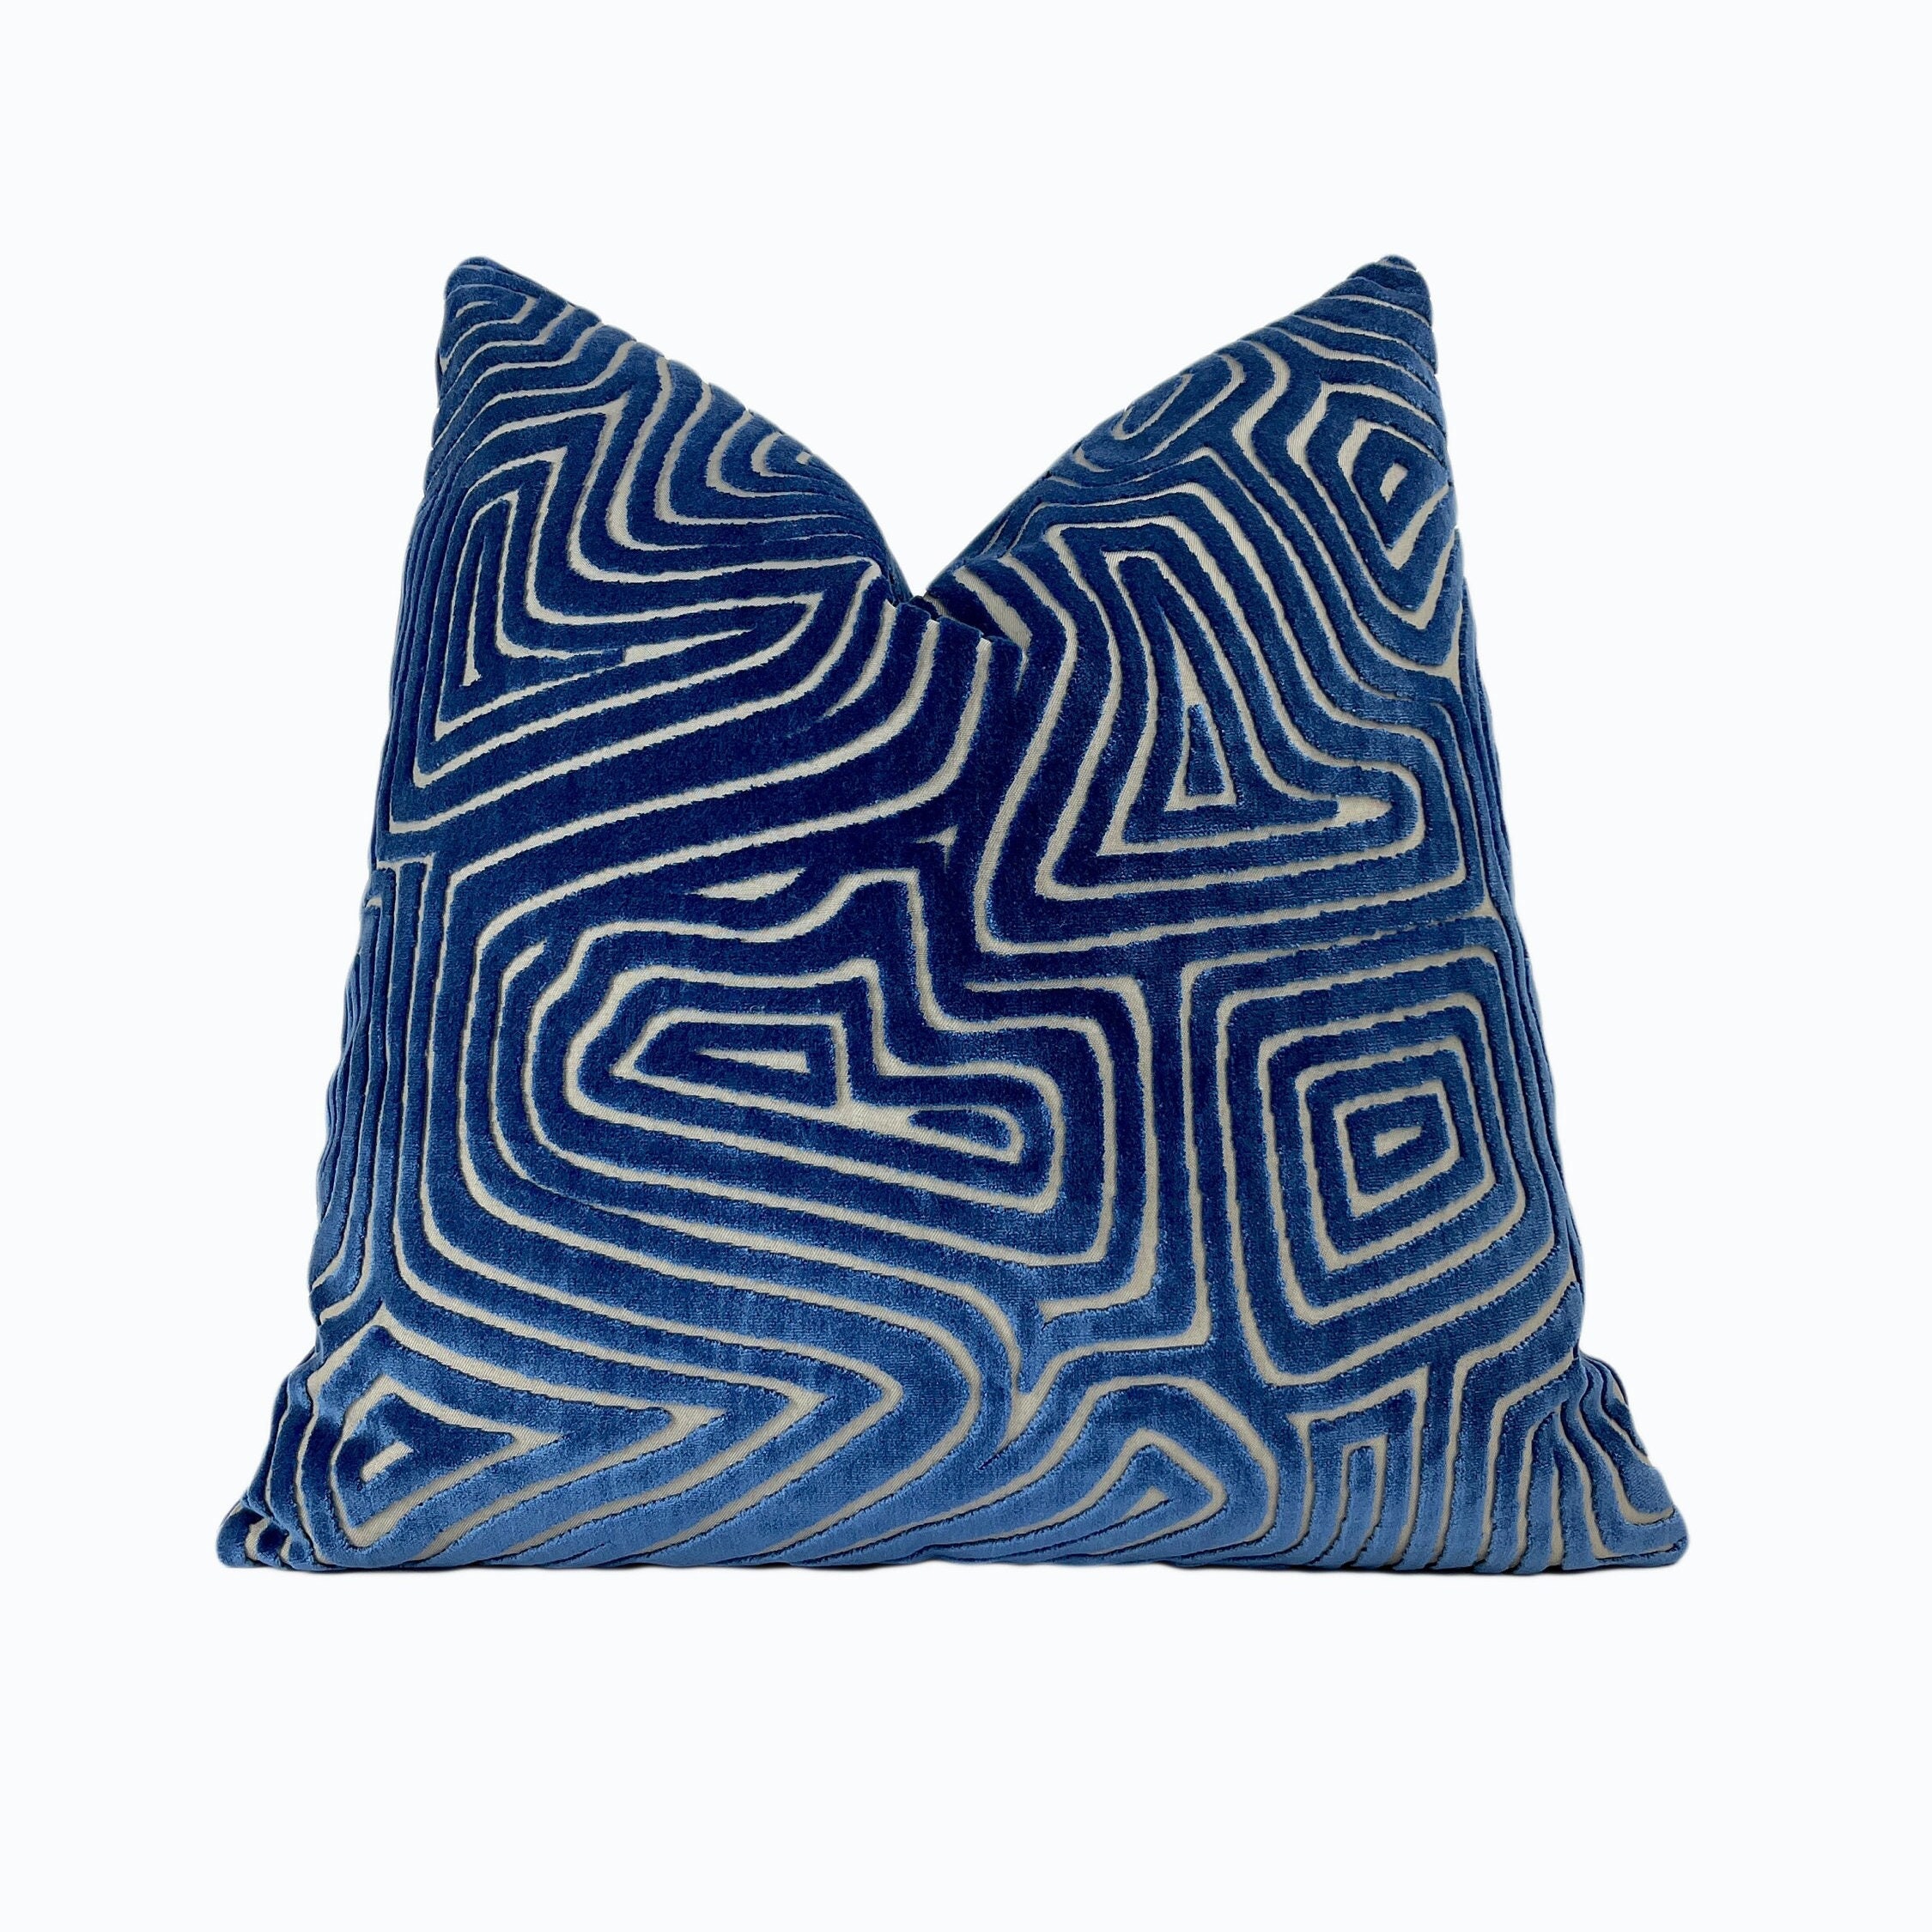 32 Dreamy Blue Throw Pillows For a Relaxing and Stylish Home